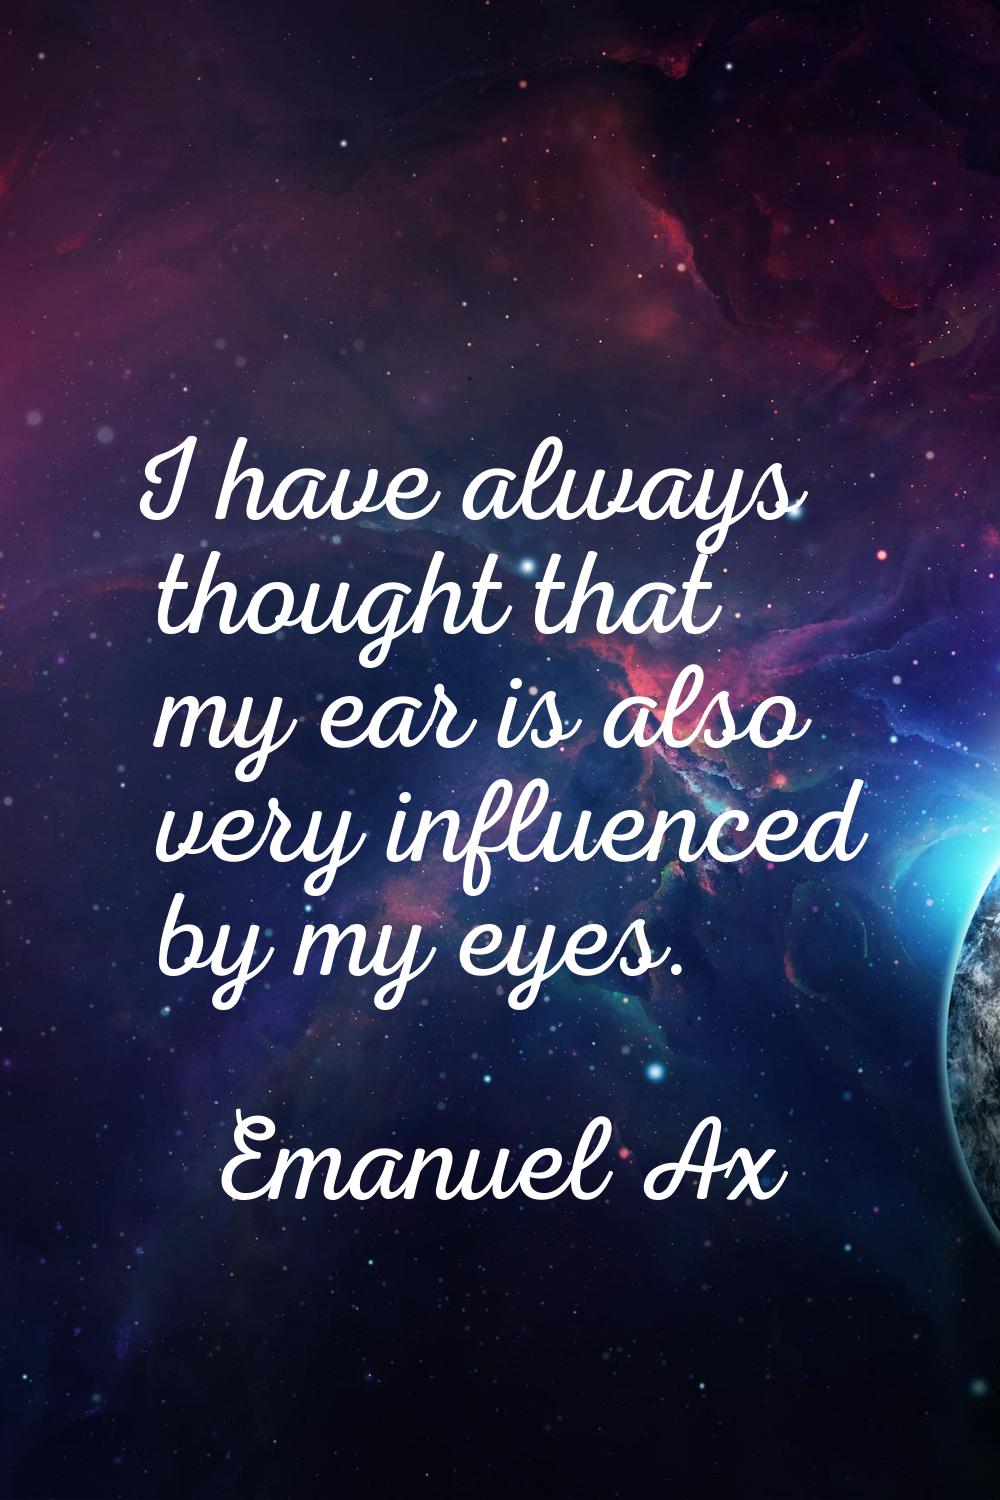 I have always thought that my ear is also very influenced by my eyes.